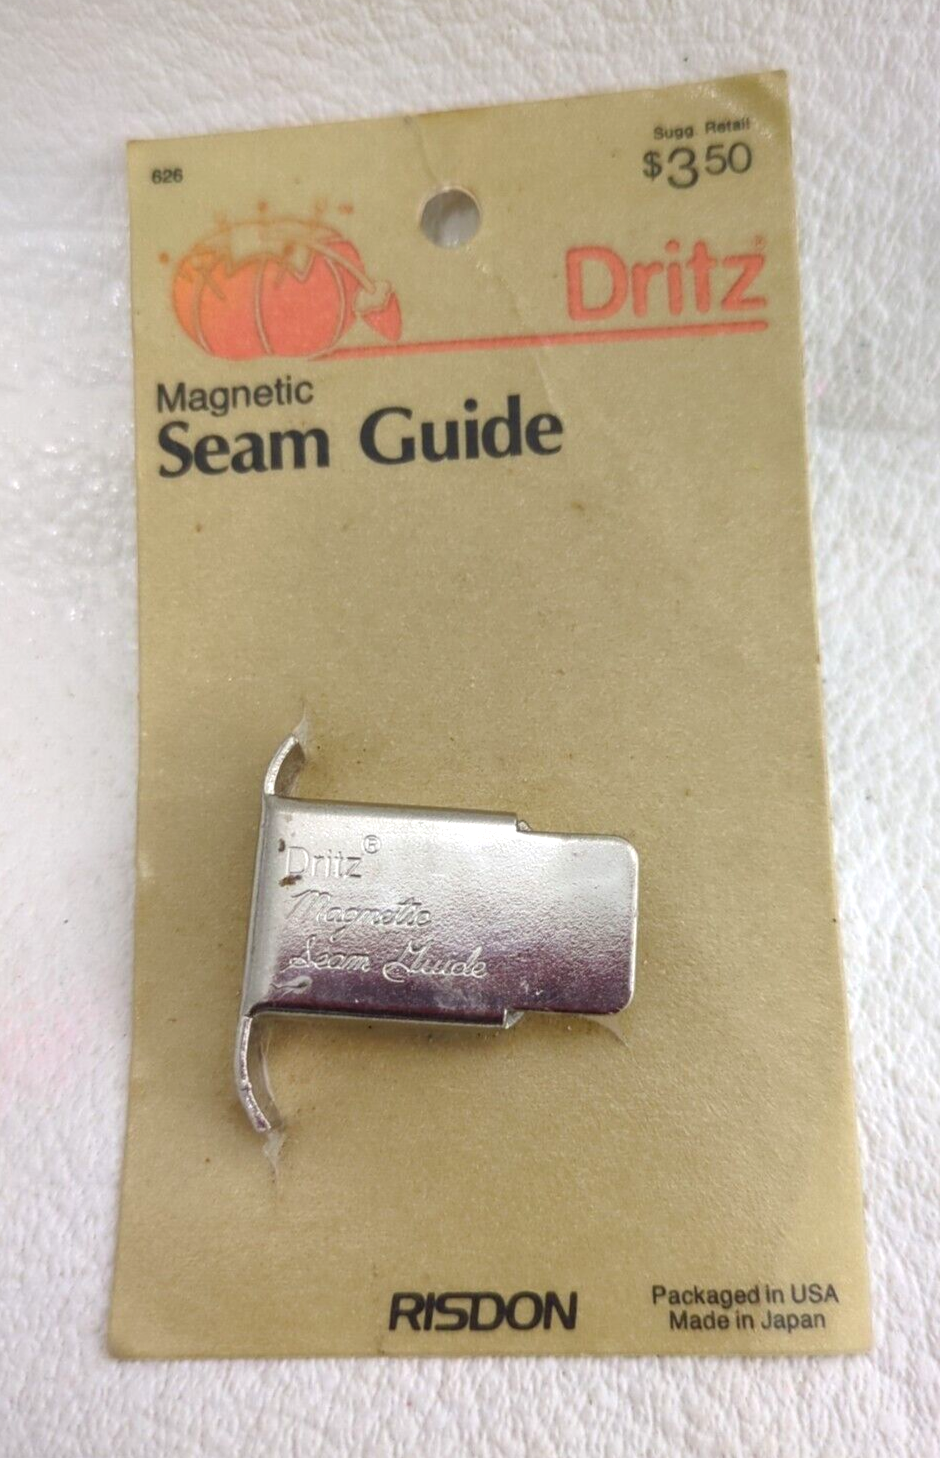 Primary image for Dritz Magnetic Seam Guide 626